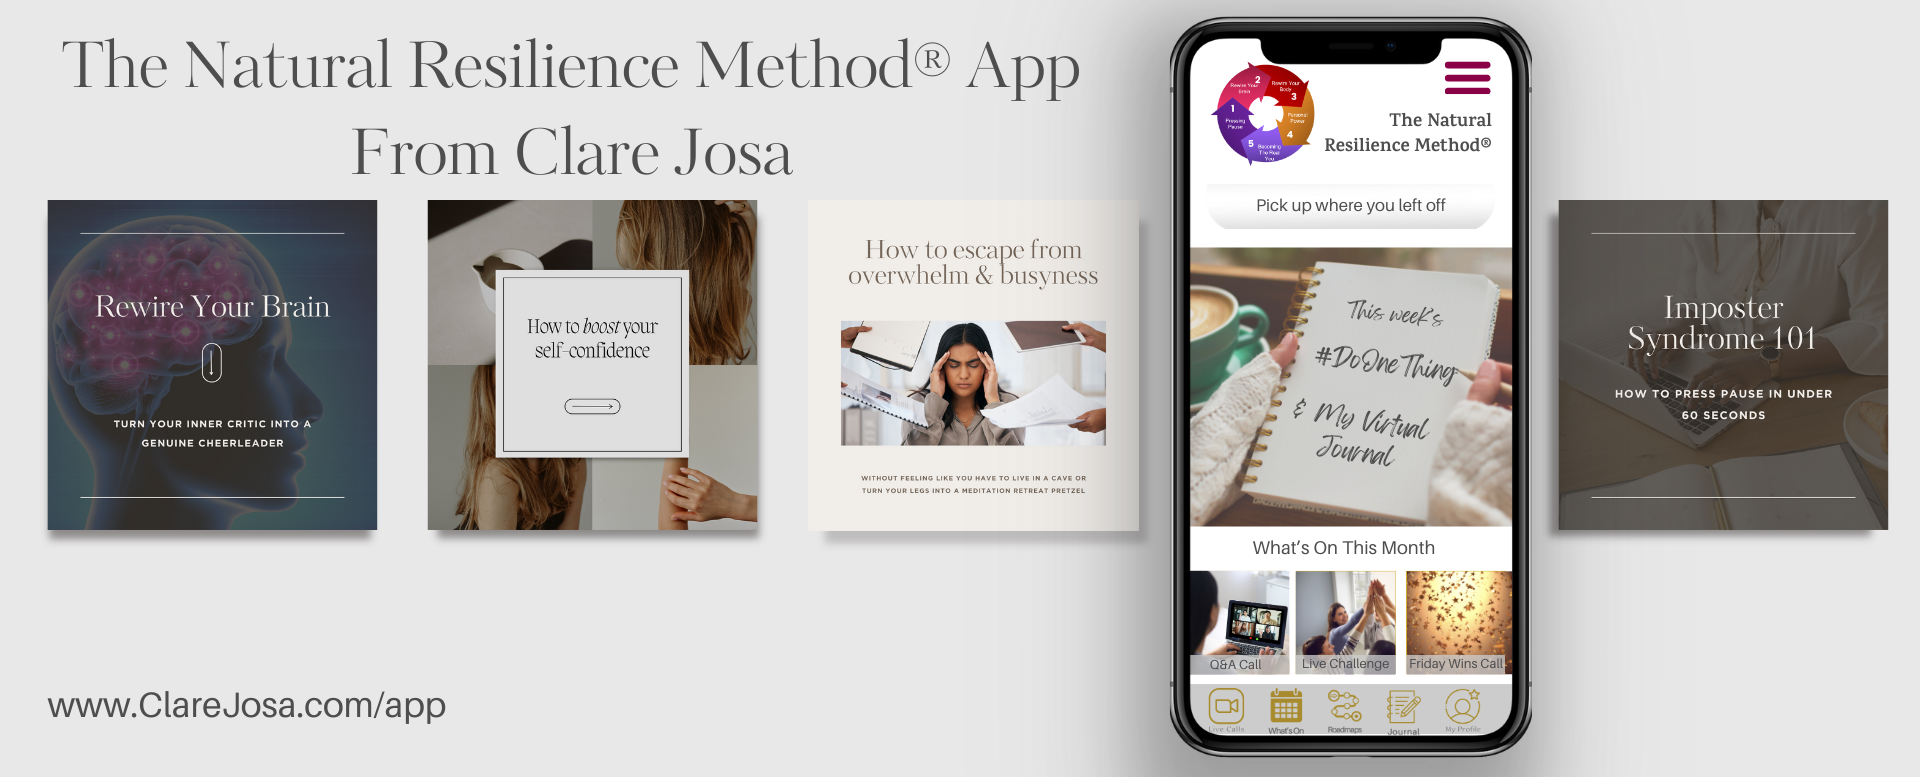 The Natural Resilience Method App